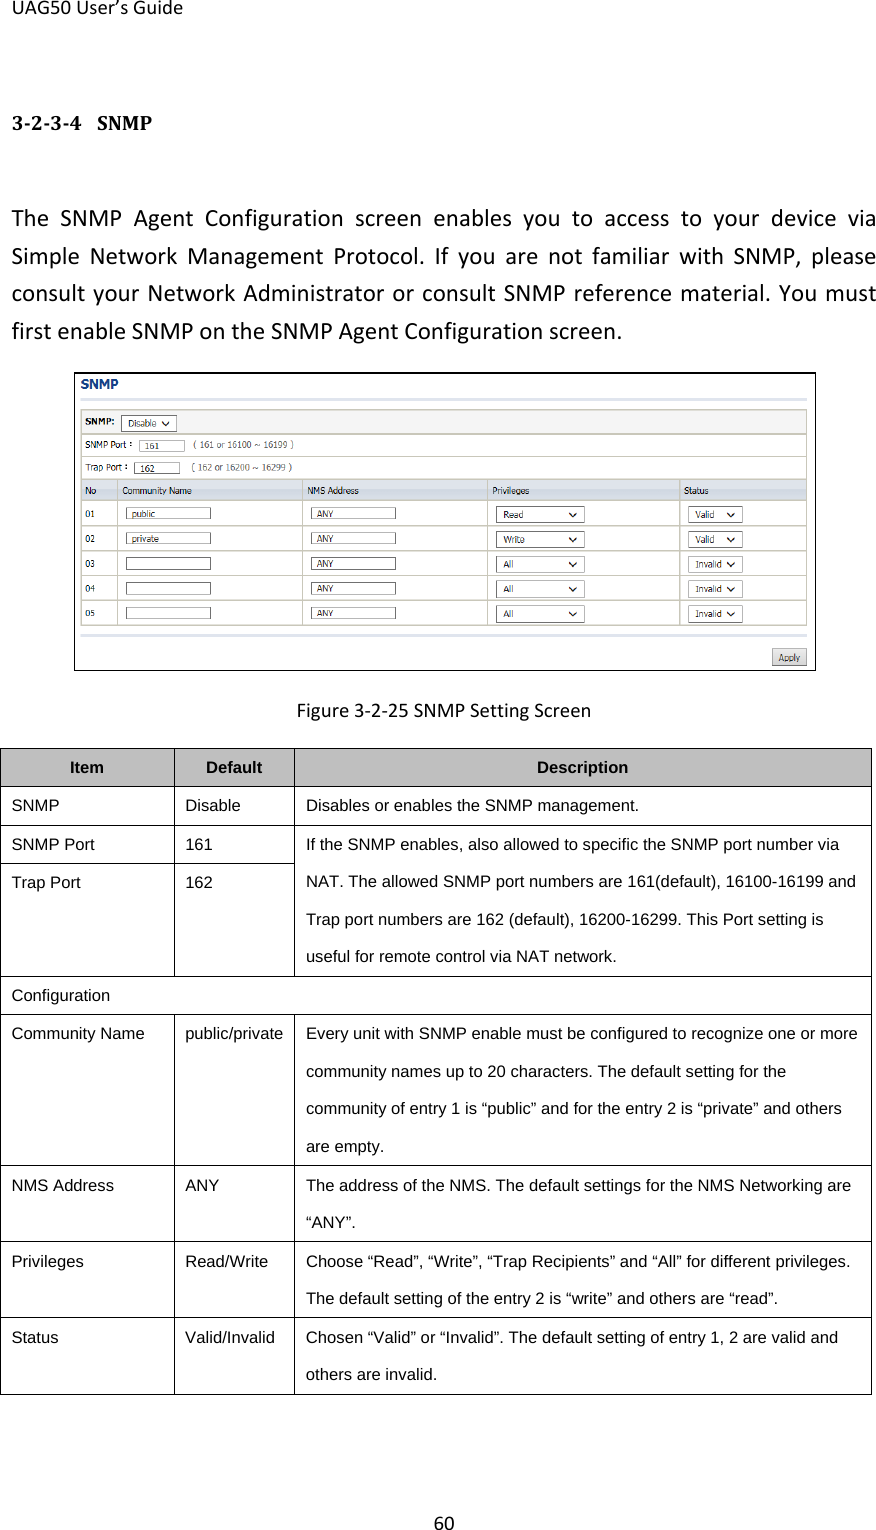 UAG50 User’s Guide 60 3-2-3-4  SNMP The SNMP Agent Configuration screen enables you to access to your device via Simple Network Management Protocol. If you are not familiar with SNMP, please consult your Network Administrator or consult SNMP reference material. You must first enable SNMP on the SNMP Agent Configuration screen.  Figure 3-2-25 SNMP Setting Screen Item Default Description SNMP Disable Disables or enables the SNMP management. SNMP Port 161 If the SNMP enables, also allowed to specific the SNMP port number via NAT. The allowed SNMP port numbers are 161(default), 16100-16199 and Trap port numbers are 162 (default), 16200-16299. This Port setting is useful for remote control via NAT network. Trap Port 162 Configuration Community Name public/private Every unit with SNMP enable must be configured to recognize one or more community names up to 20 characters. The default setting for the community of entry 1 is “public” and for the entry 2 is “private” and others are empty. NMS Address ANY The address of the NMS. The default settings for the NMS Networking are “ANY”. Privileges Read/Write Choose “Read”, “Write”, “Trap Recipients” and “All” for different privileges. The default setting of the entry 2 is “write” and others are “read”. Status  Valid/Invalid  Chosen “Valid” or “Invalid”. The default setting of entry 1, 2 are valid and others are invalid. 